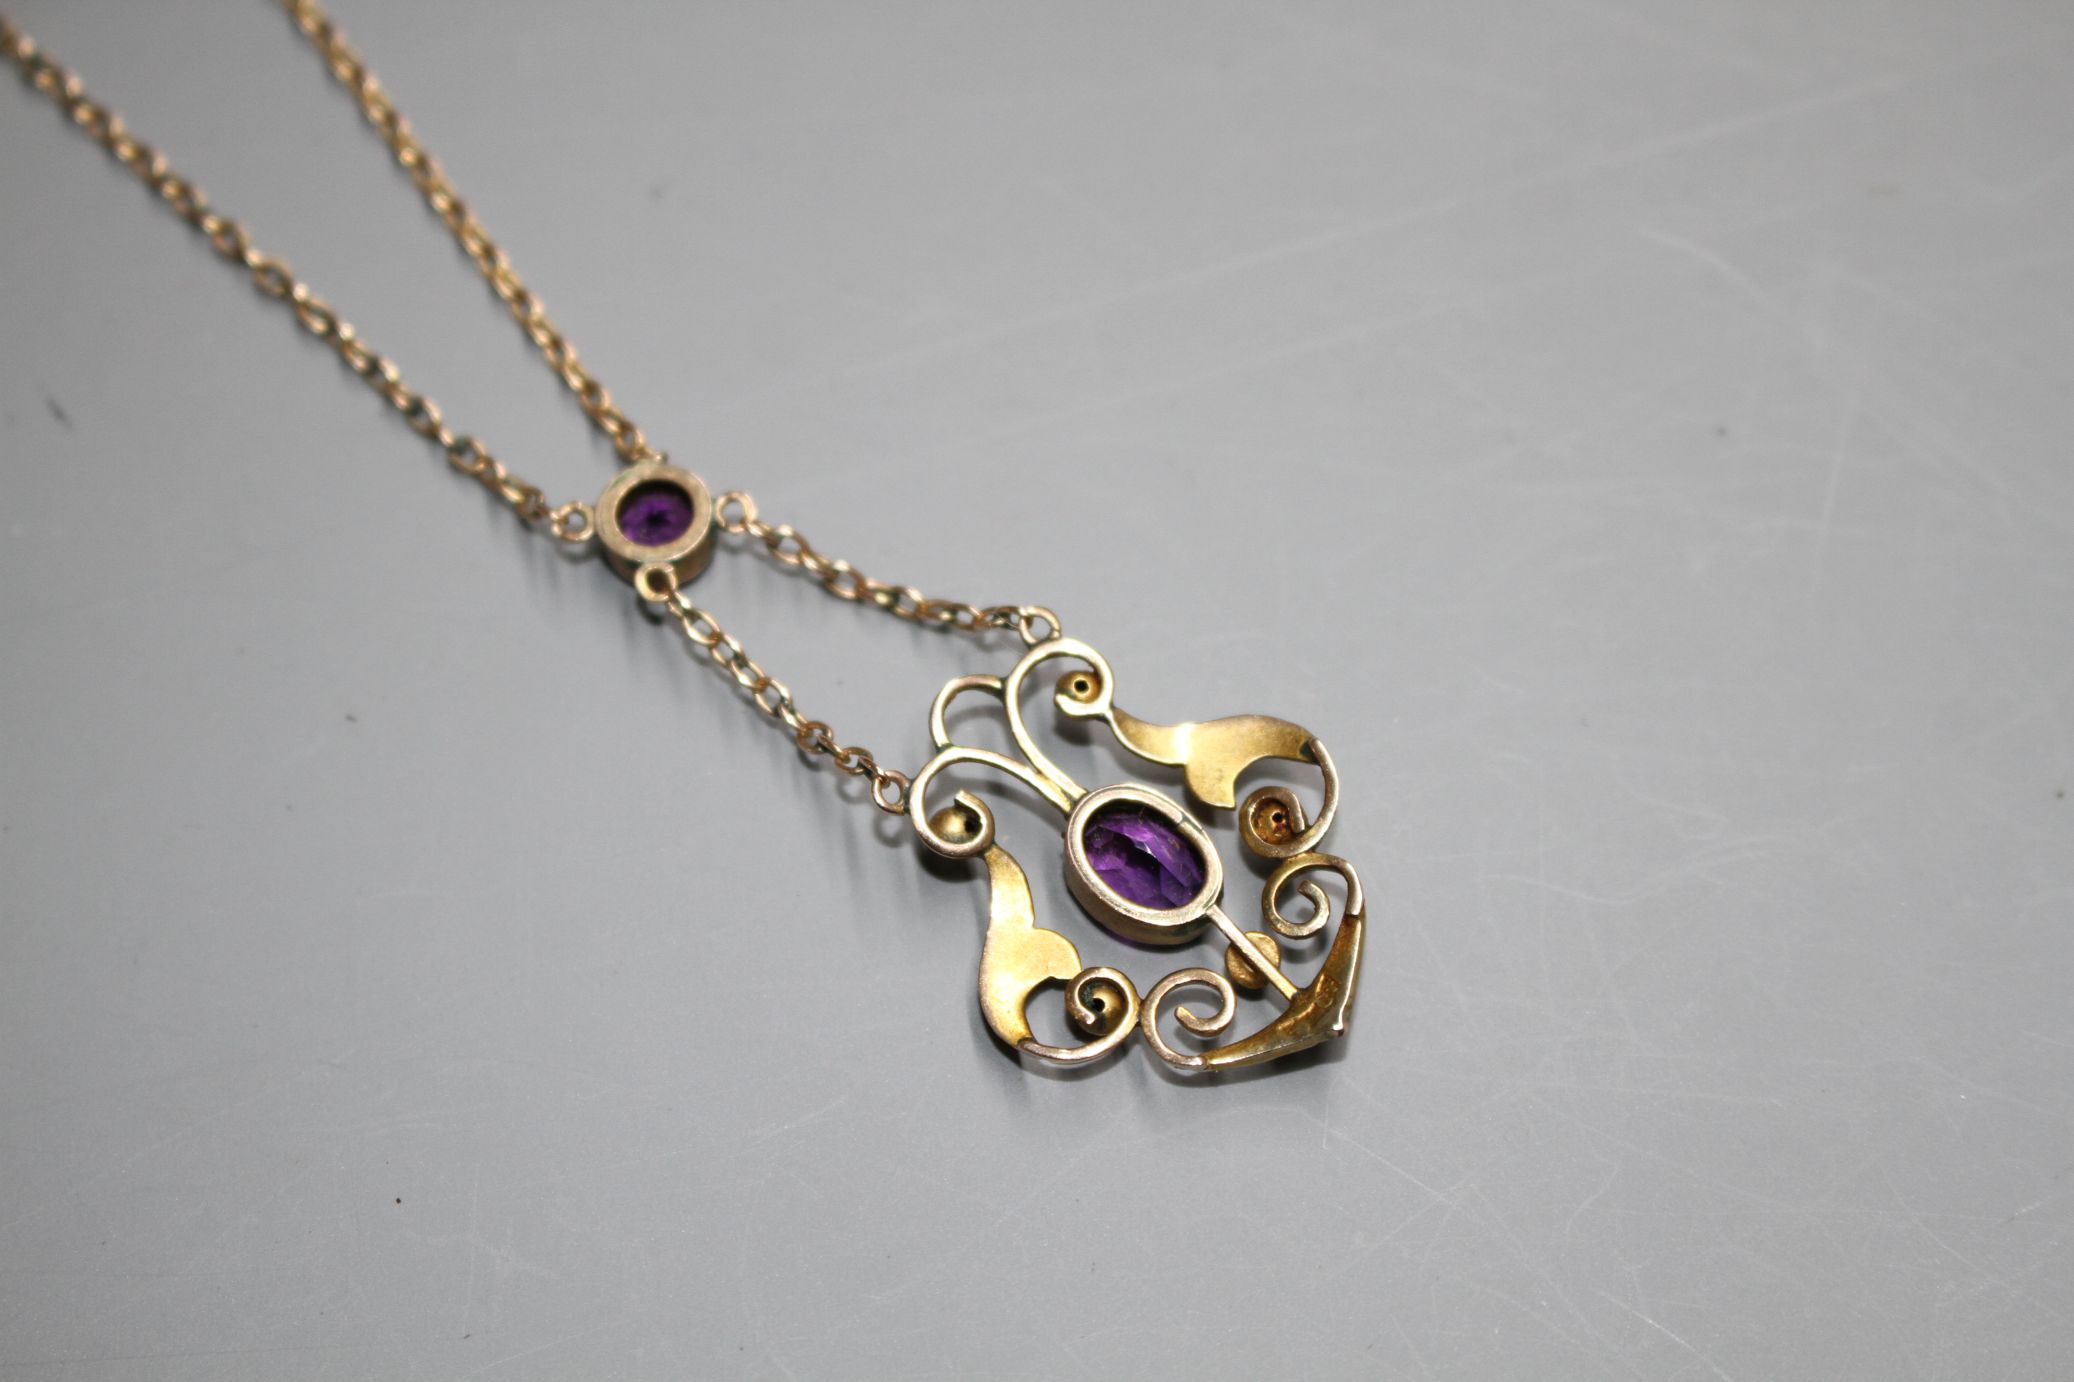 An Edwardian 9ct, amethyst and seed pearl set pendant necklace, pendant lower section 25mm. - Image 4 of 4